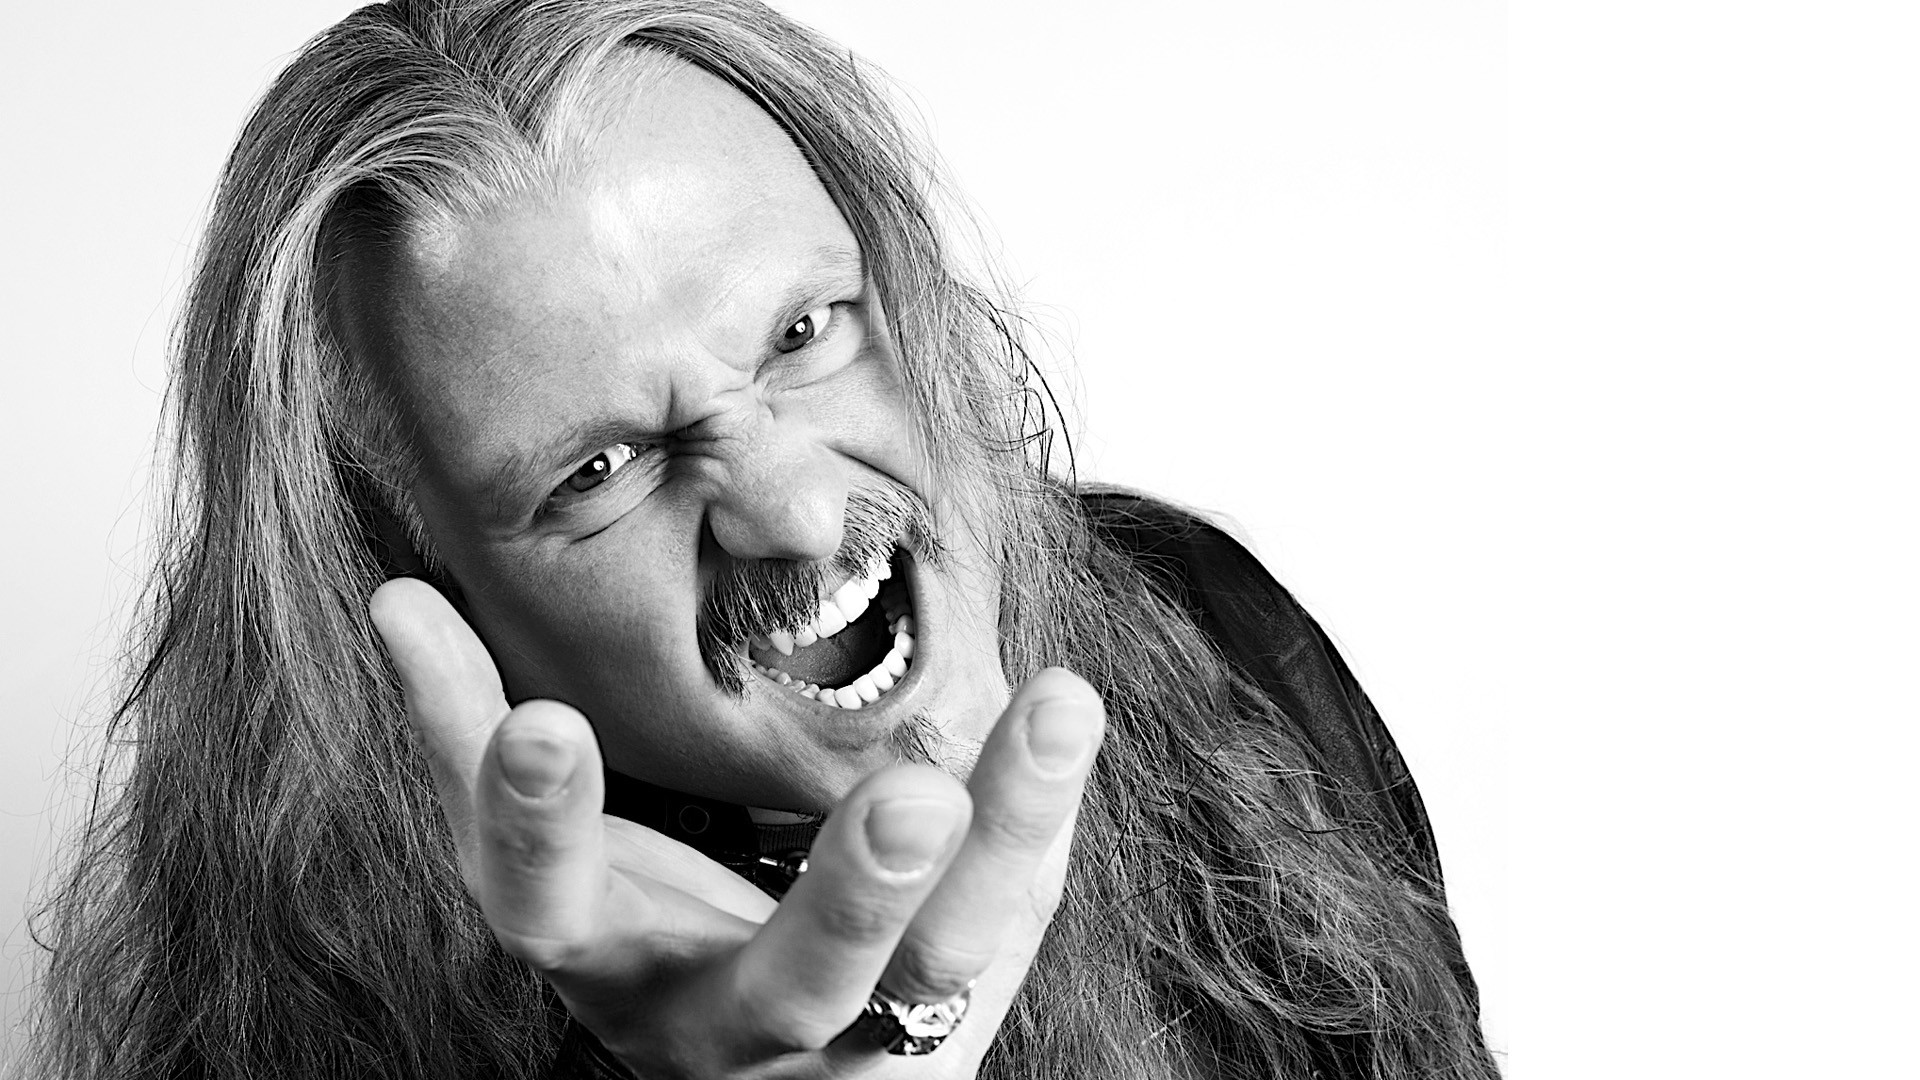 1920x1080 Wallpaper Iced earth, Scream, Hands, Fingers, Mustache HD, Picture, Image